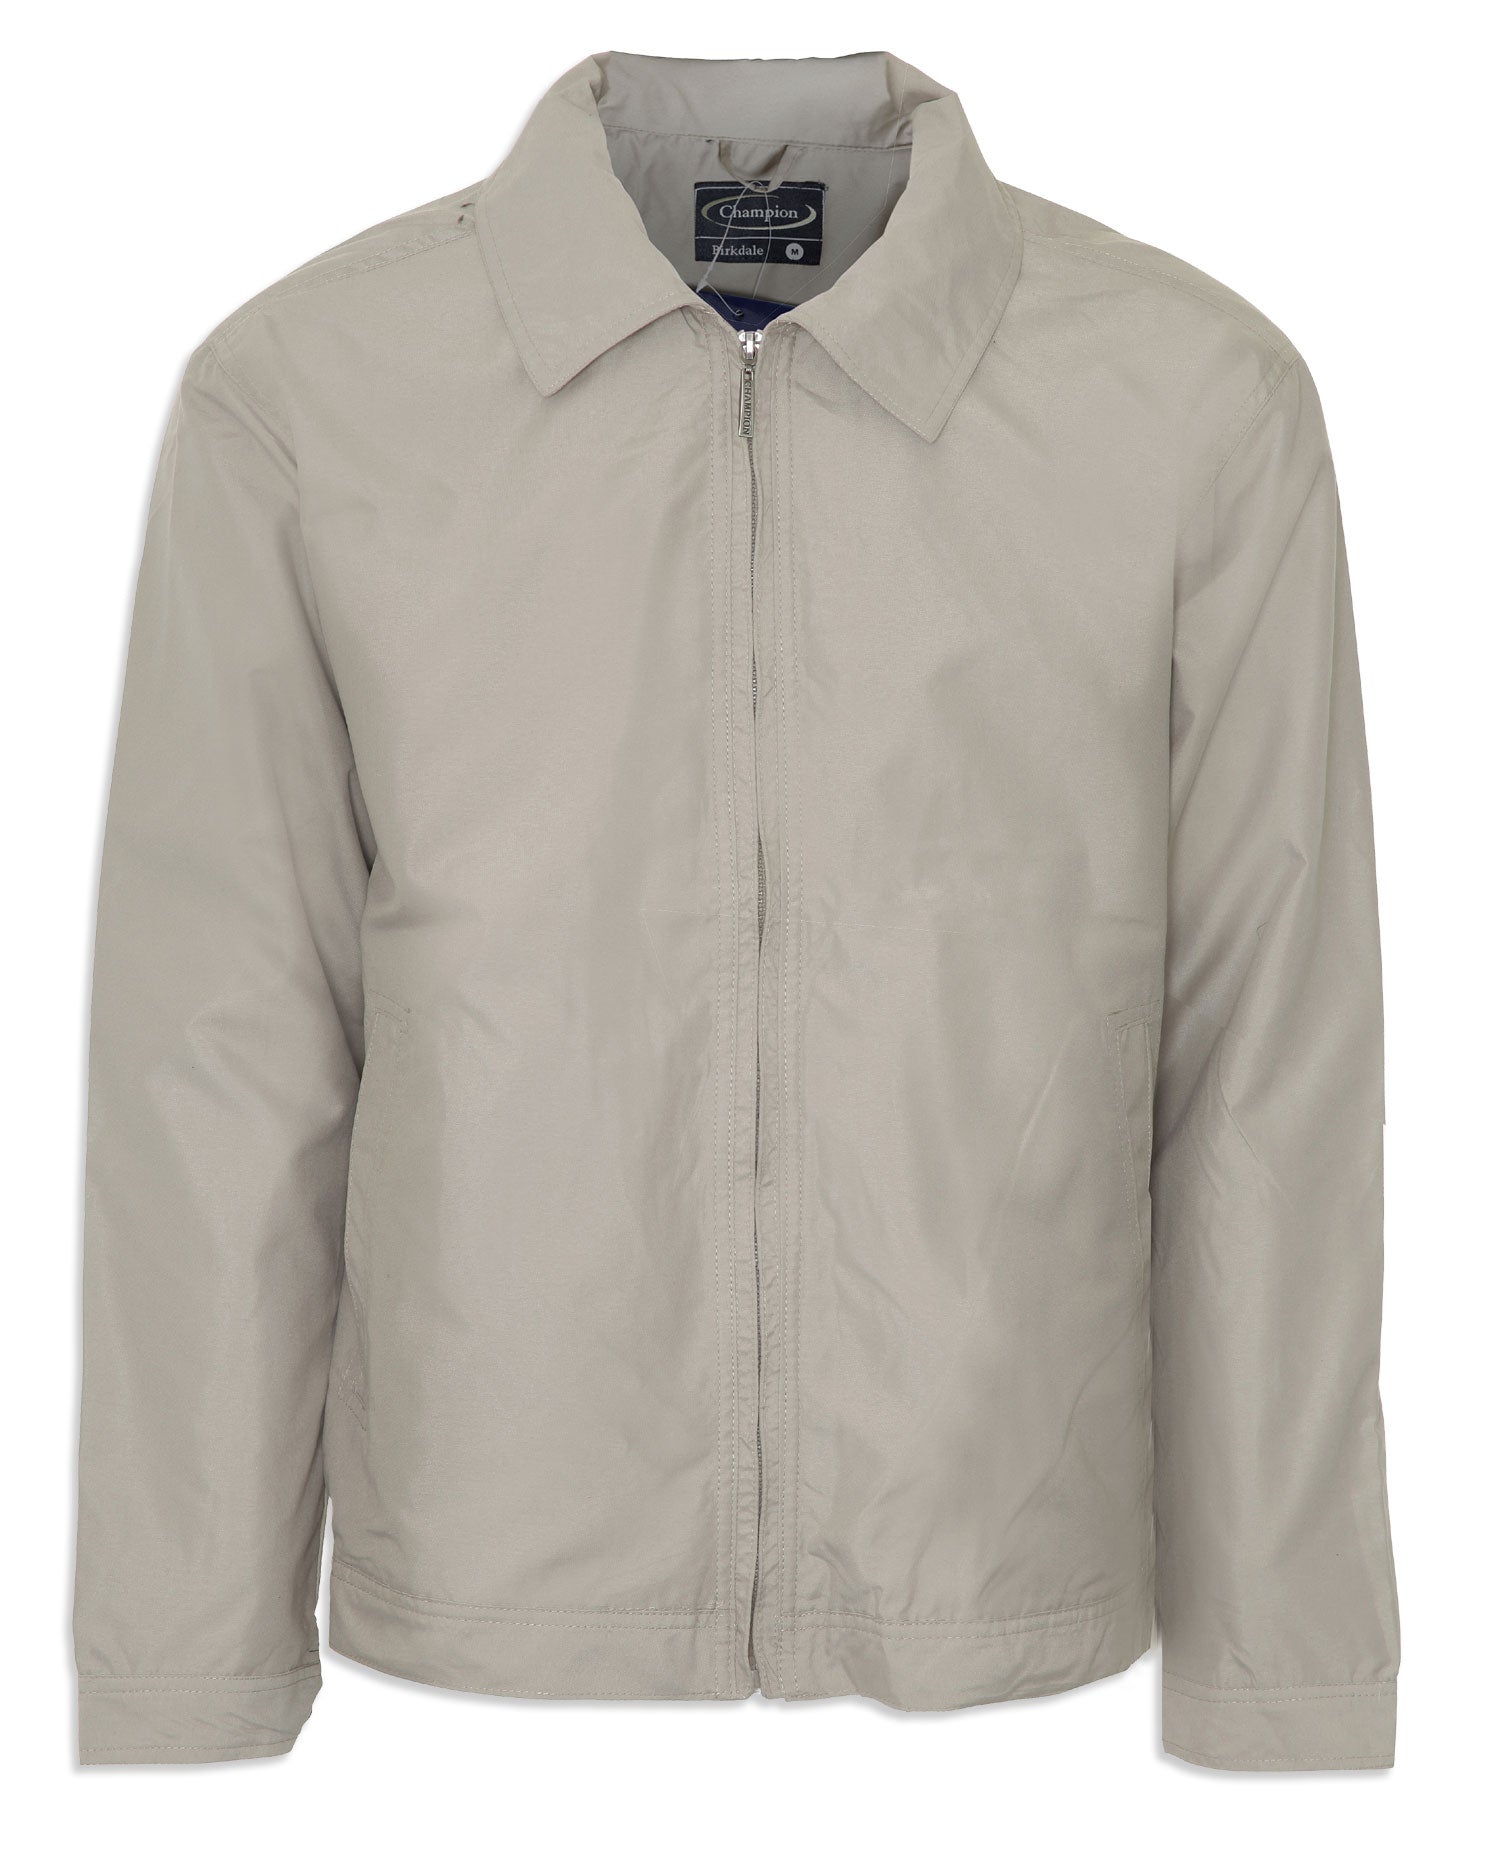 Birkdale jacket in stone colour for summer